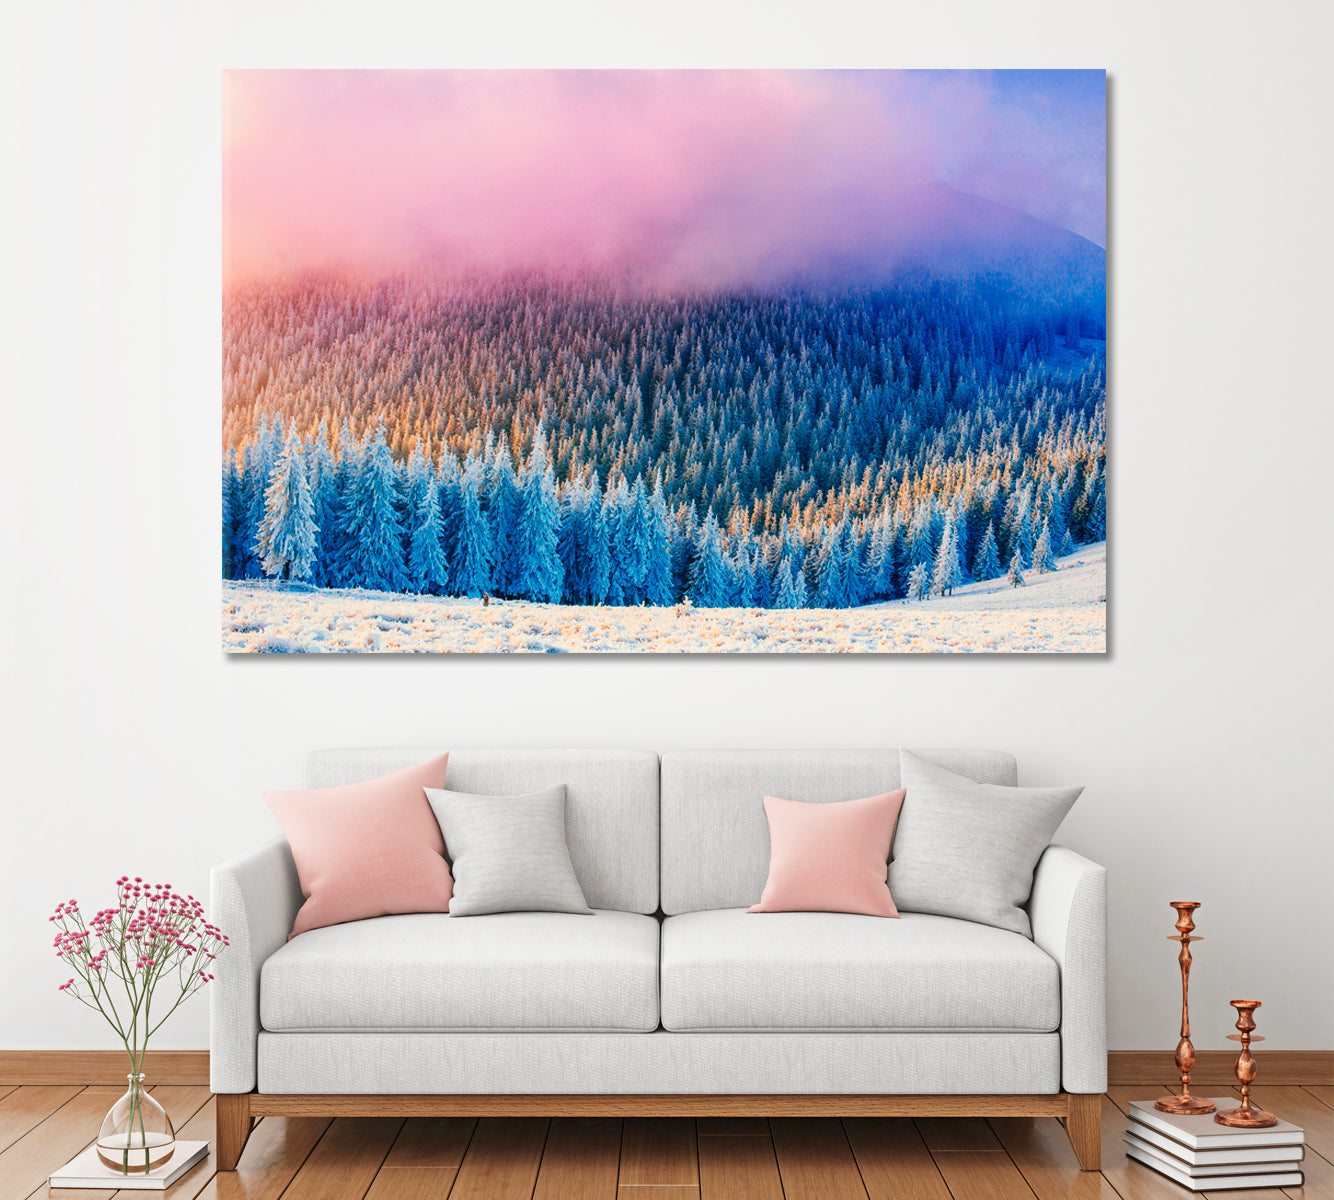 Winter Forest in Austria Alps Canvas Print ArtLexy 1 Panel 24"x16" inches 